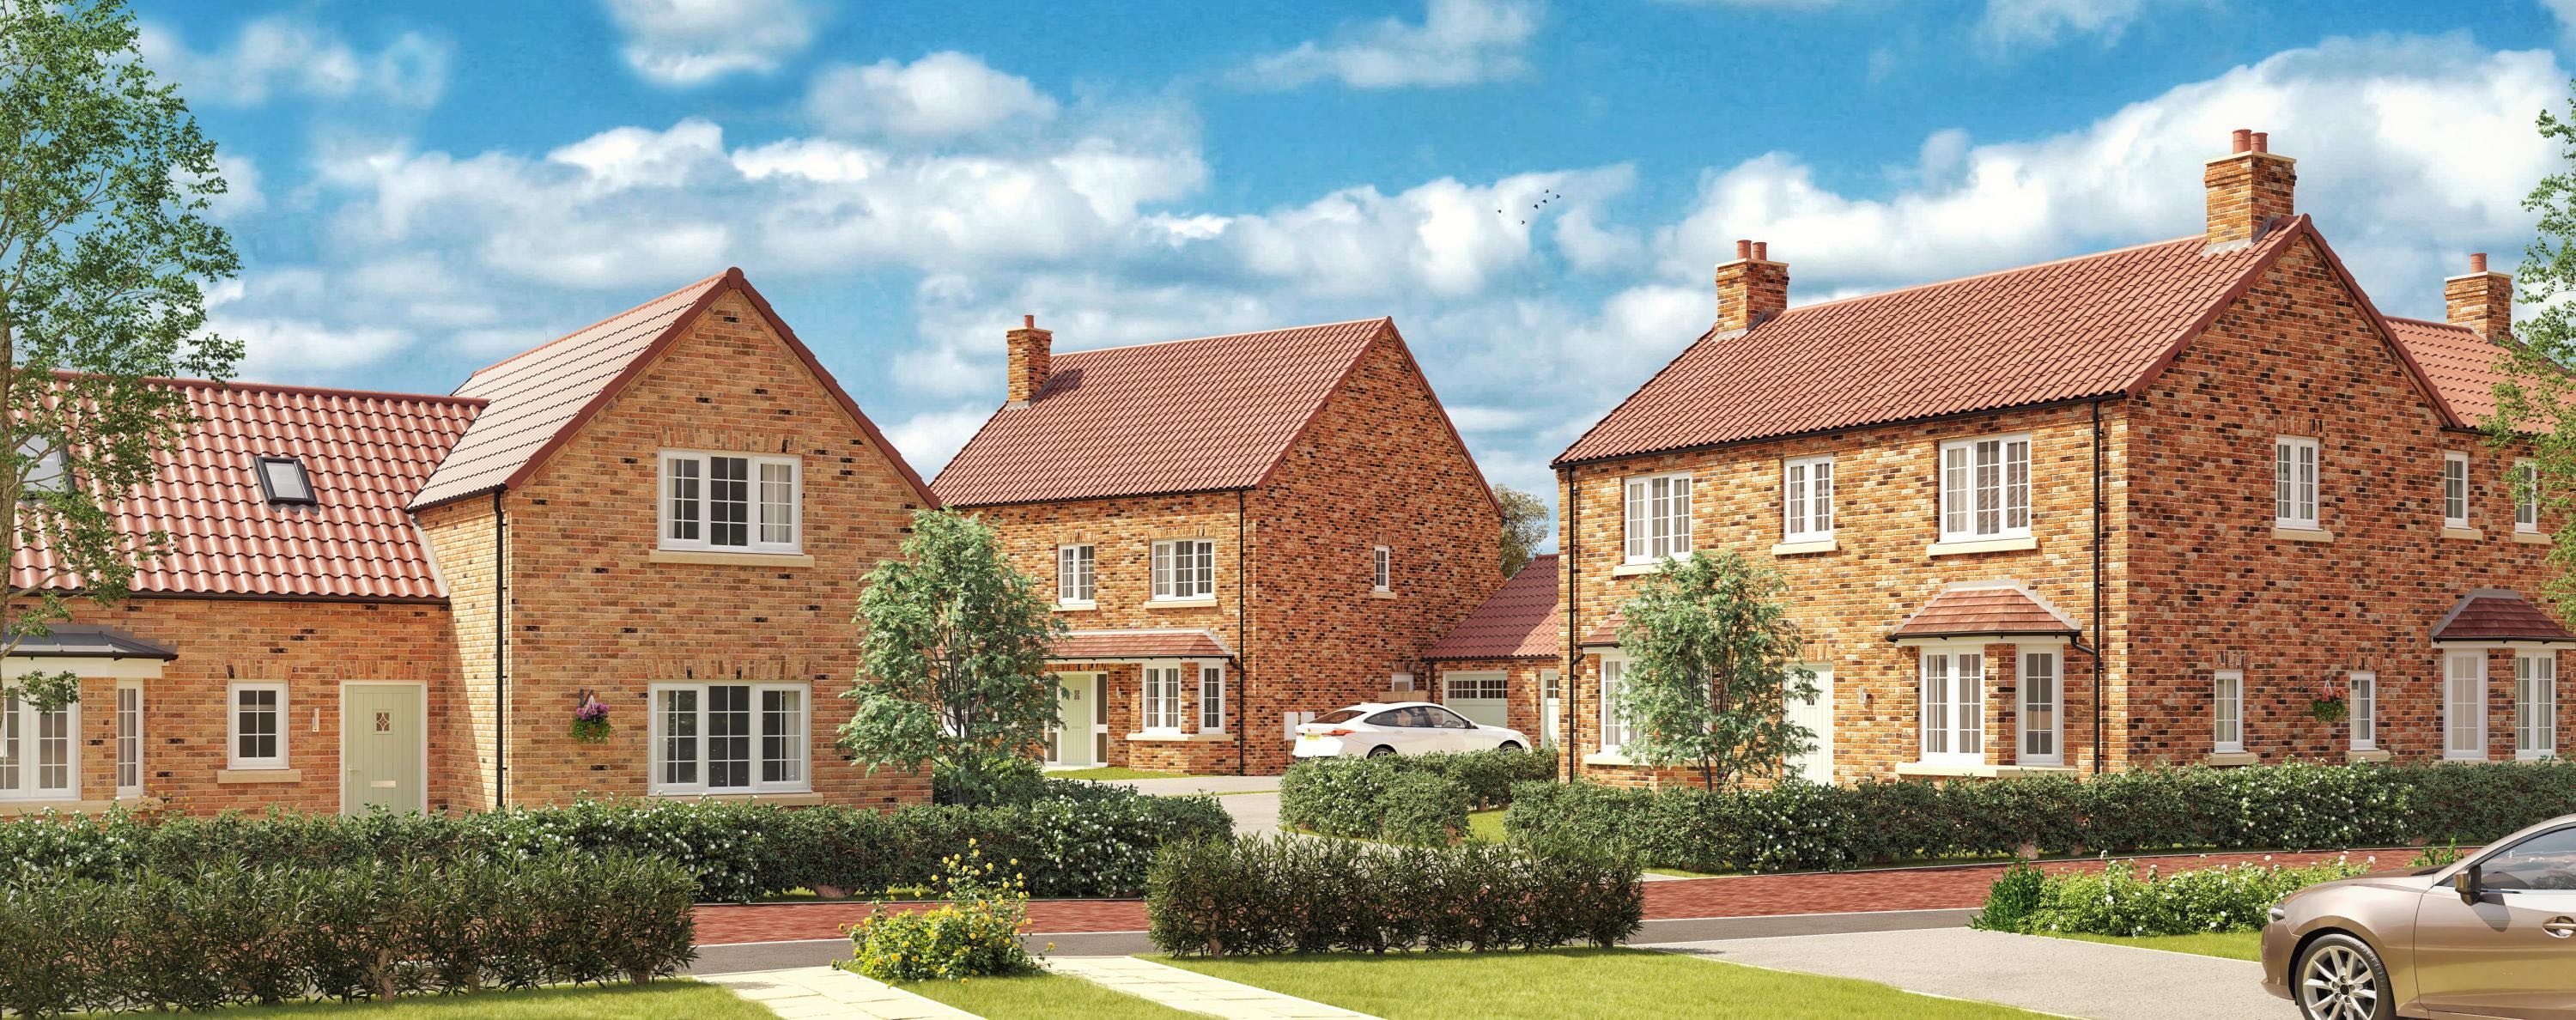 Forest Chase is a lovely development of new homes in Great Ouseburn. Featuring 3, 4 and 5-bedroom homes, in a sought after location. 